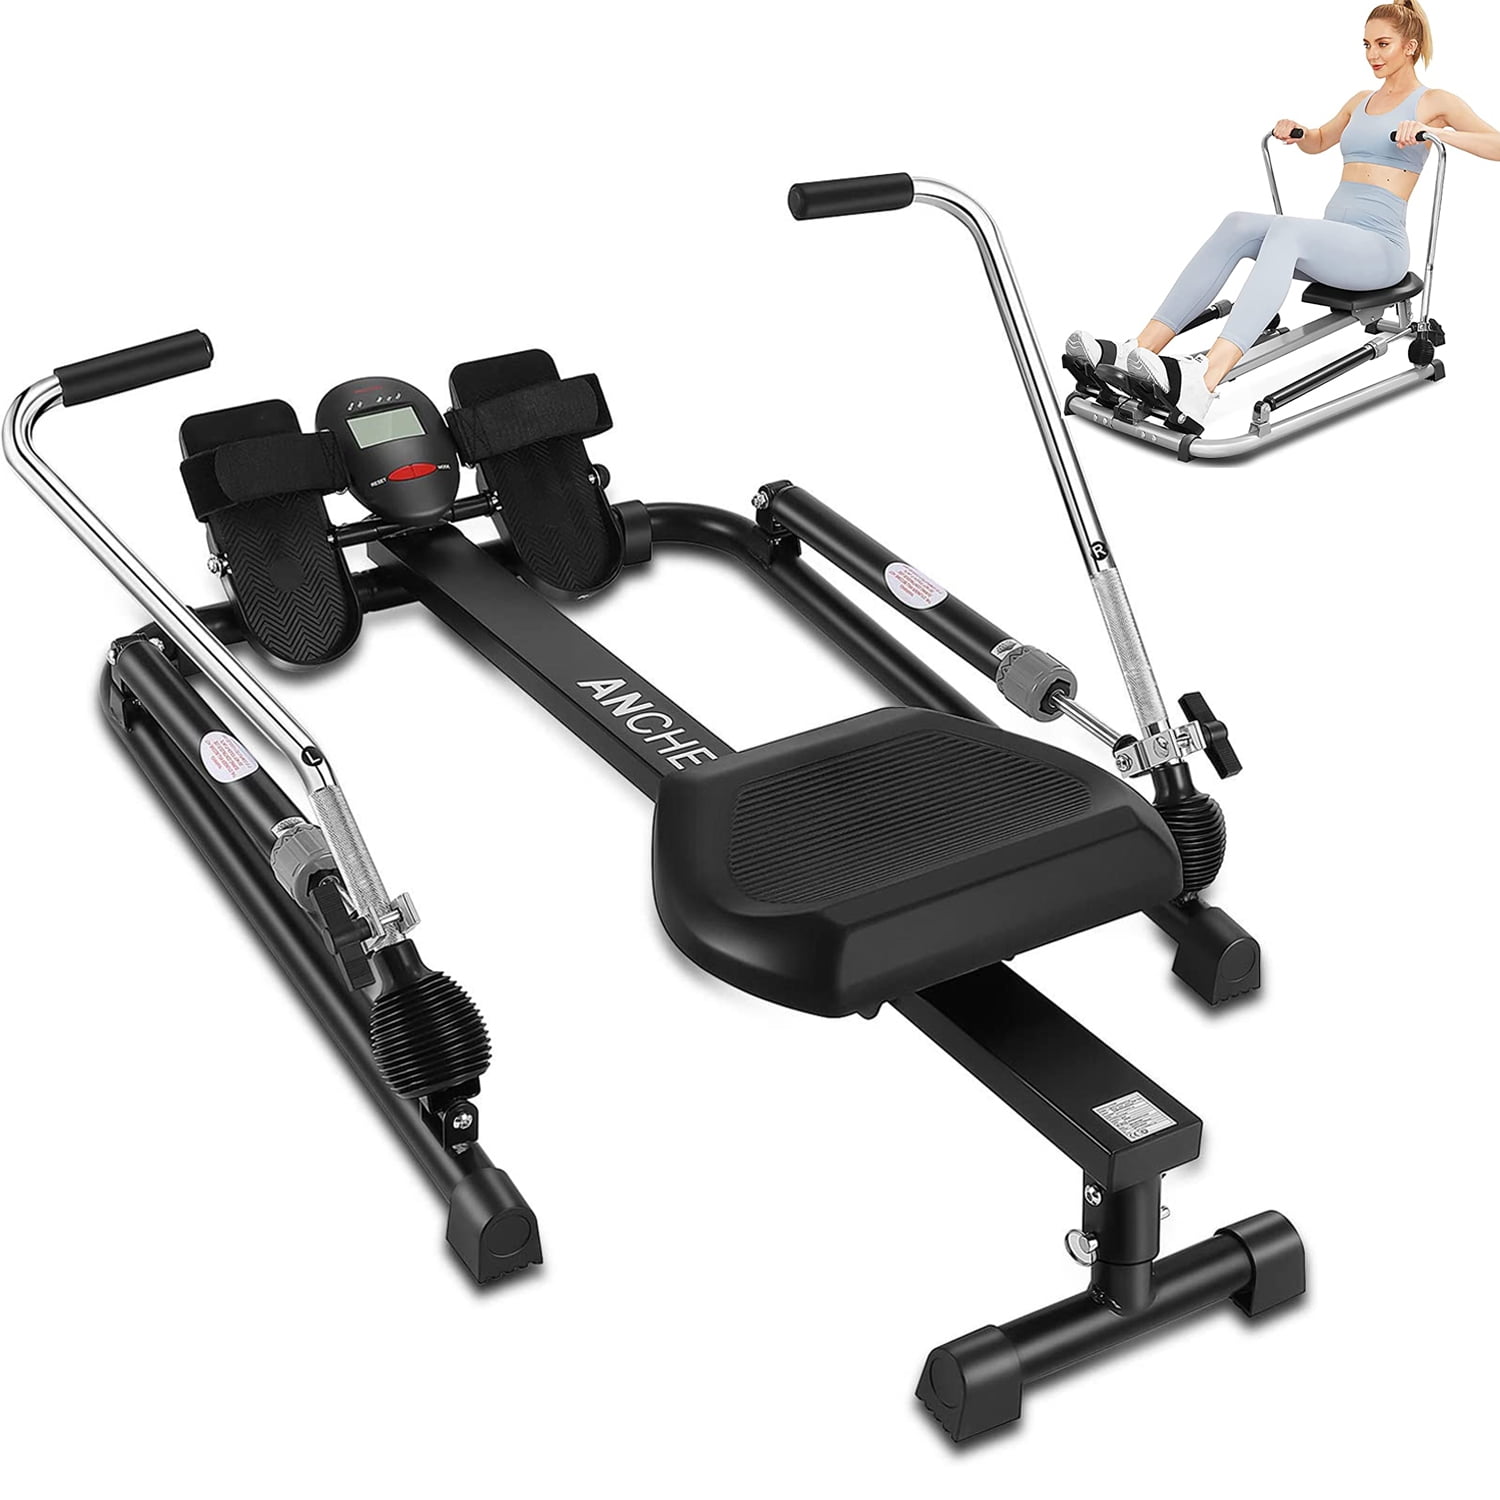 Home/Apartment Full Motion Adjustable Rower with 12 Level Resistance & Soft Seat & LCD Monitor & 45 Inch Long Rail for Indoor Cardio Exercise Gray ANCHEER Hydraulic Rowing Machine 